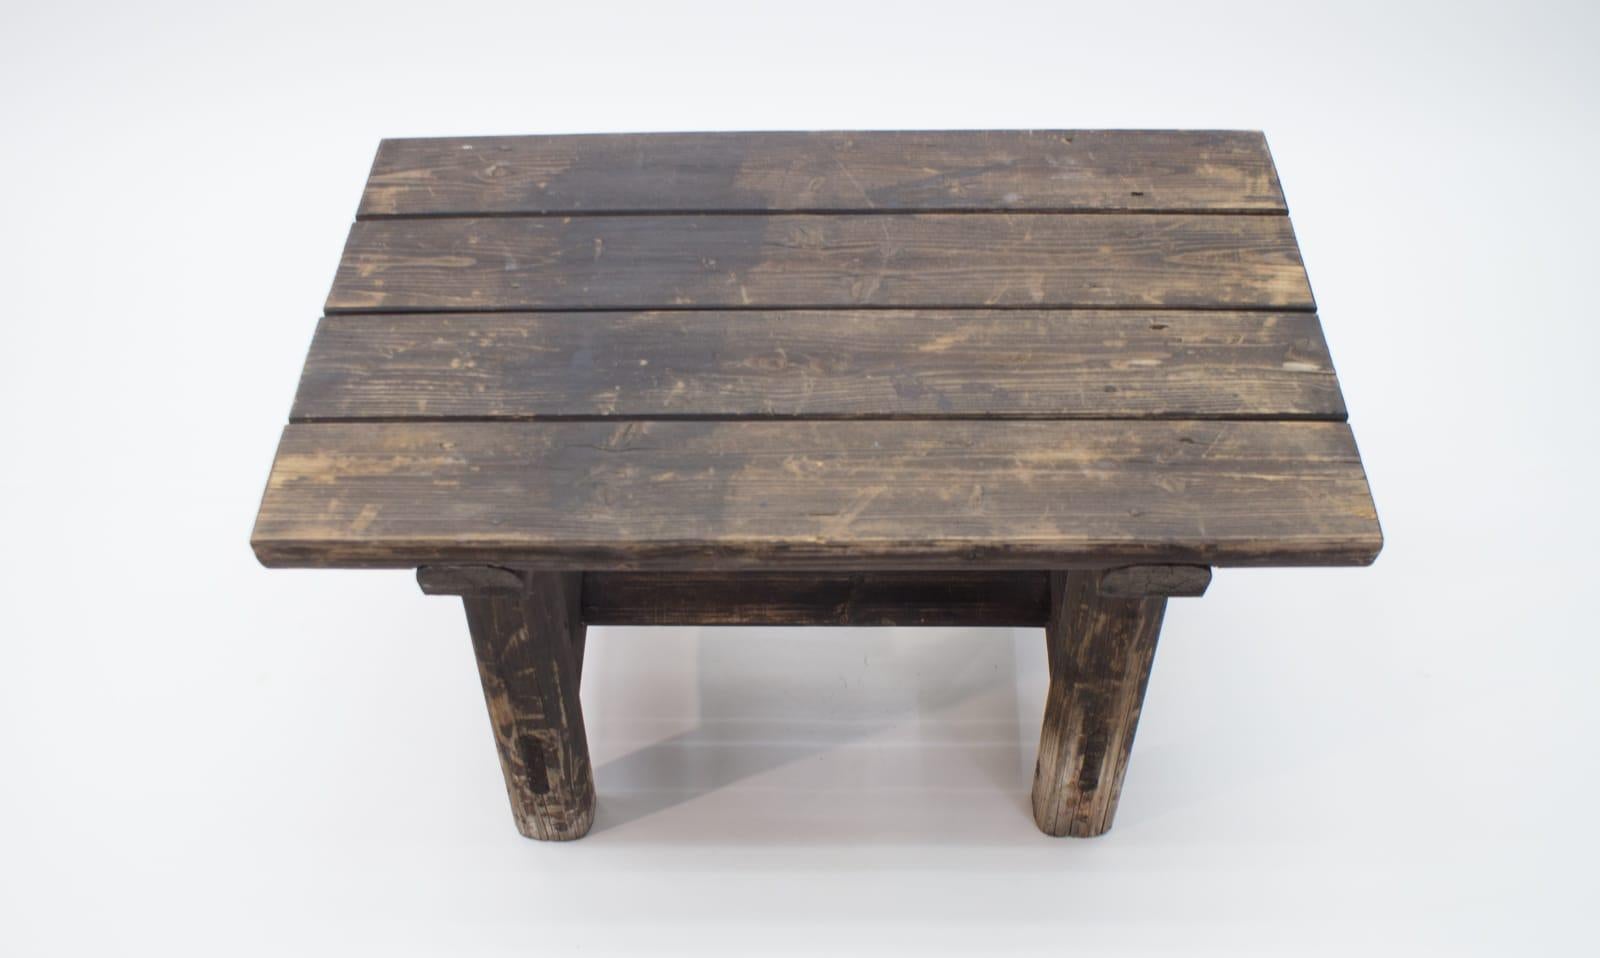 Black Forest Wooden Bench, 1930s-1940s Germany 3